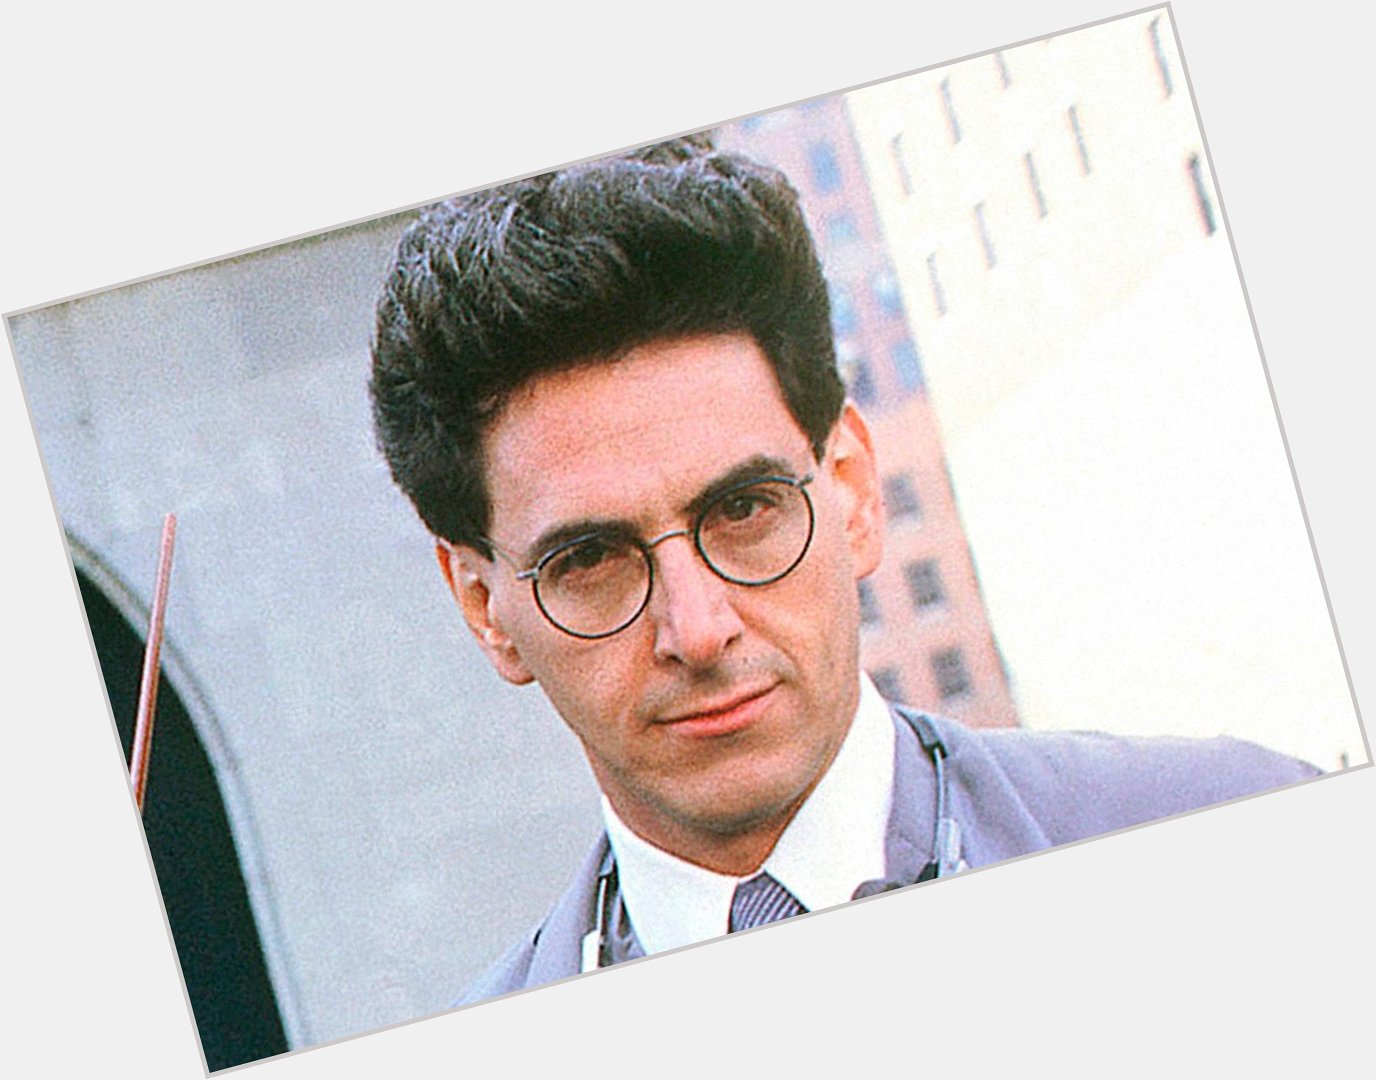 Happy birthday to Harold Ramis! The iconic actor, comedian, and director would have turned 77 years old today. 